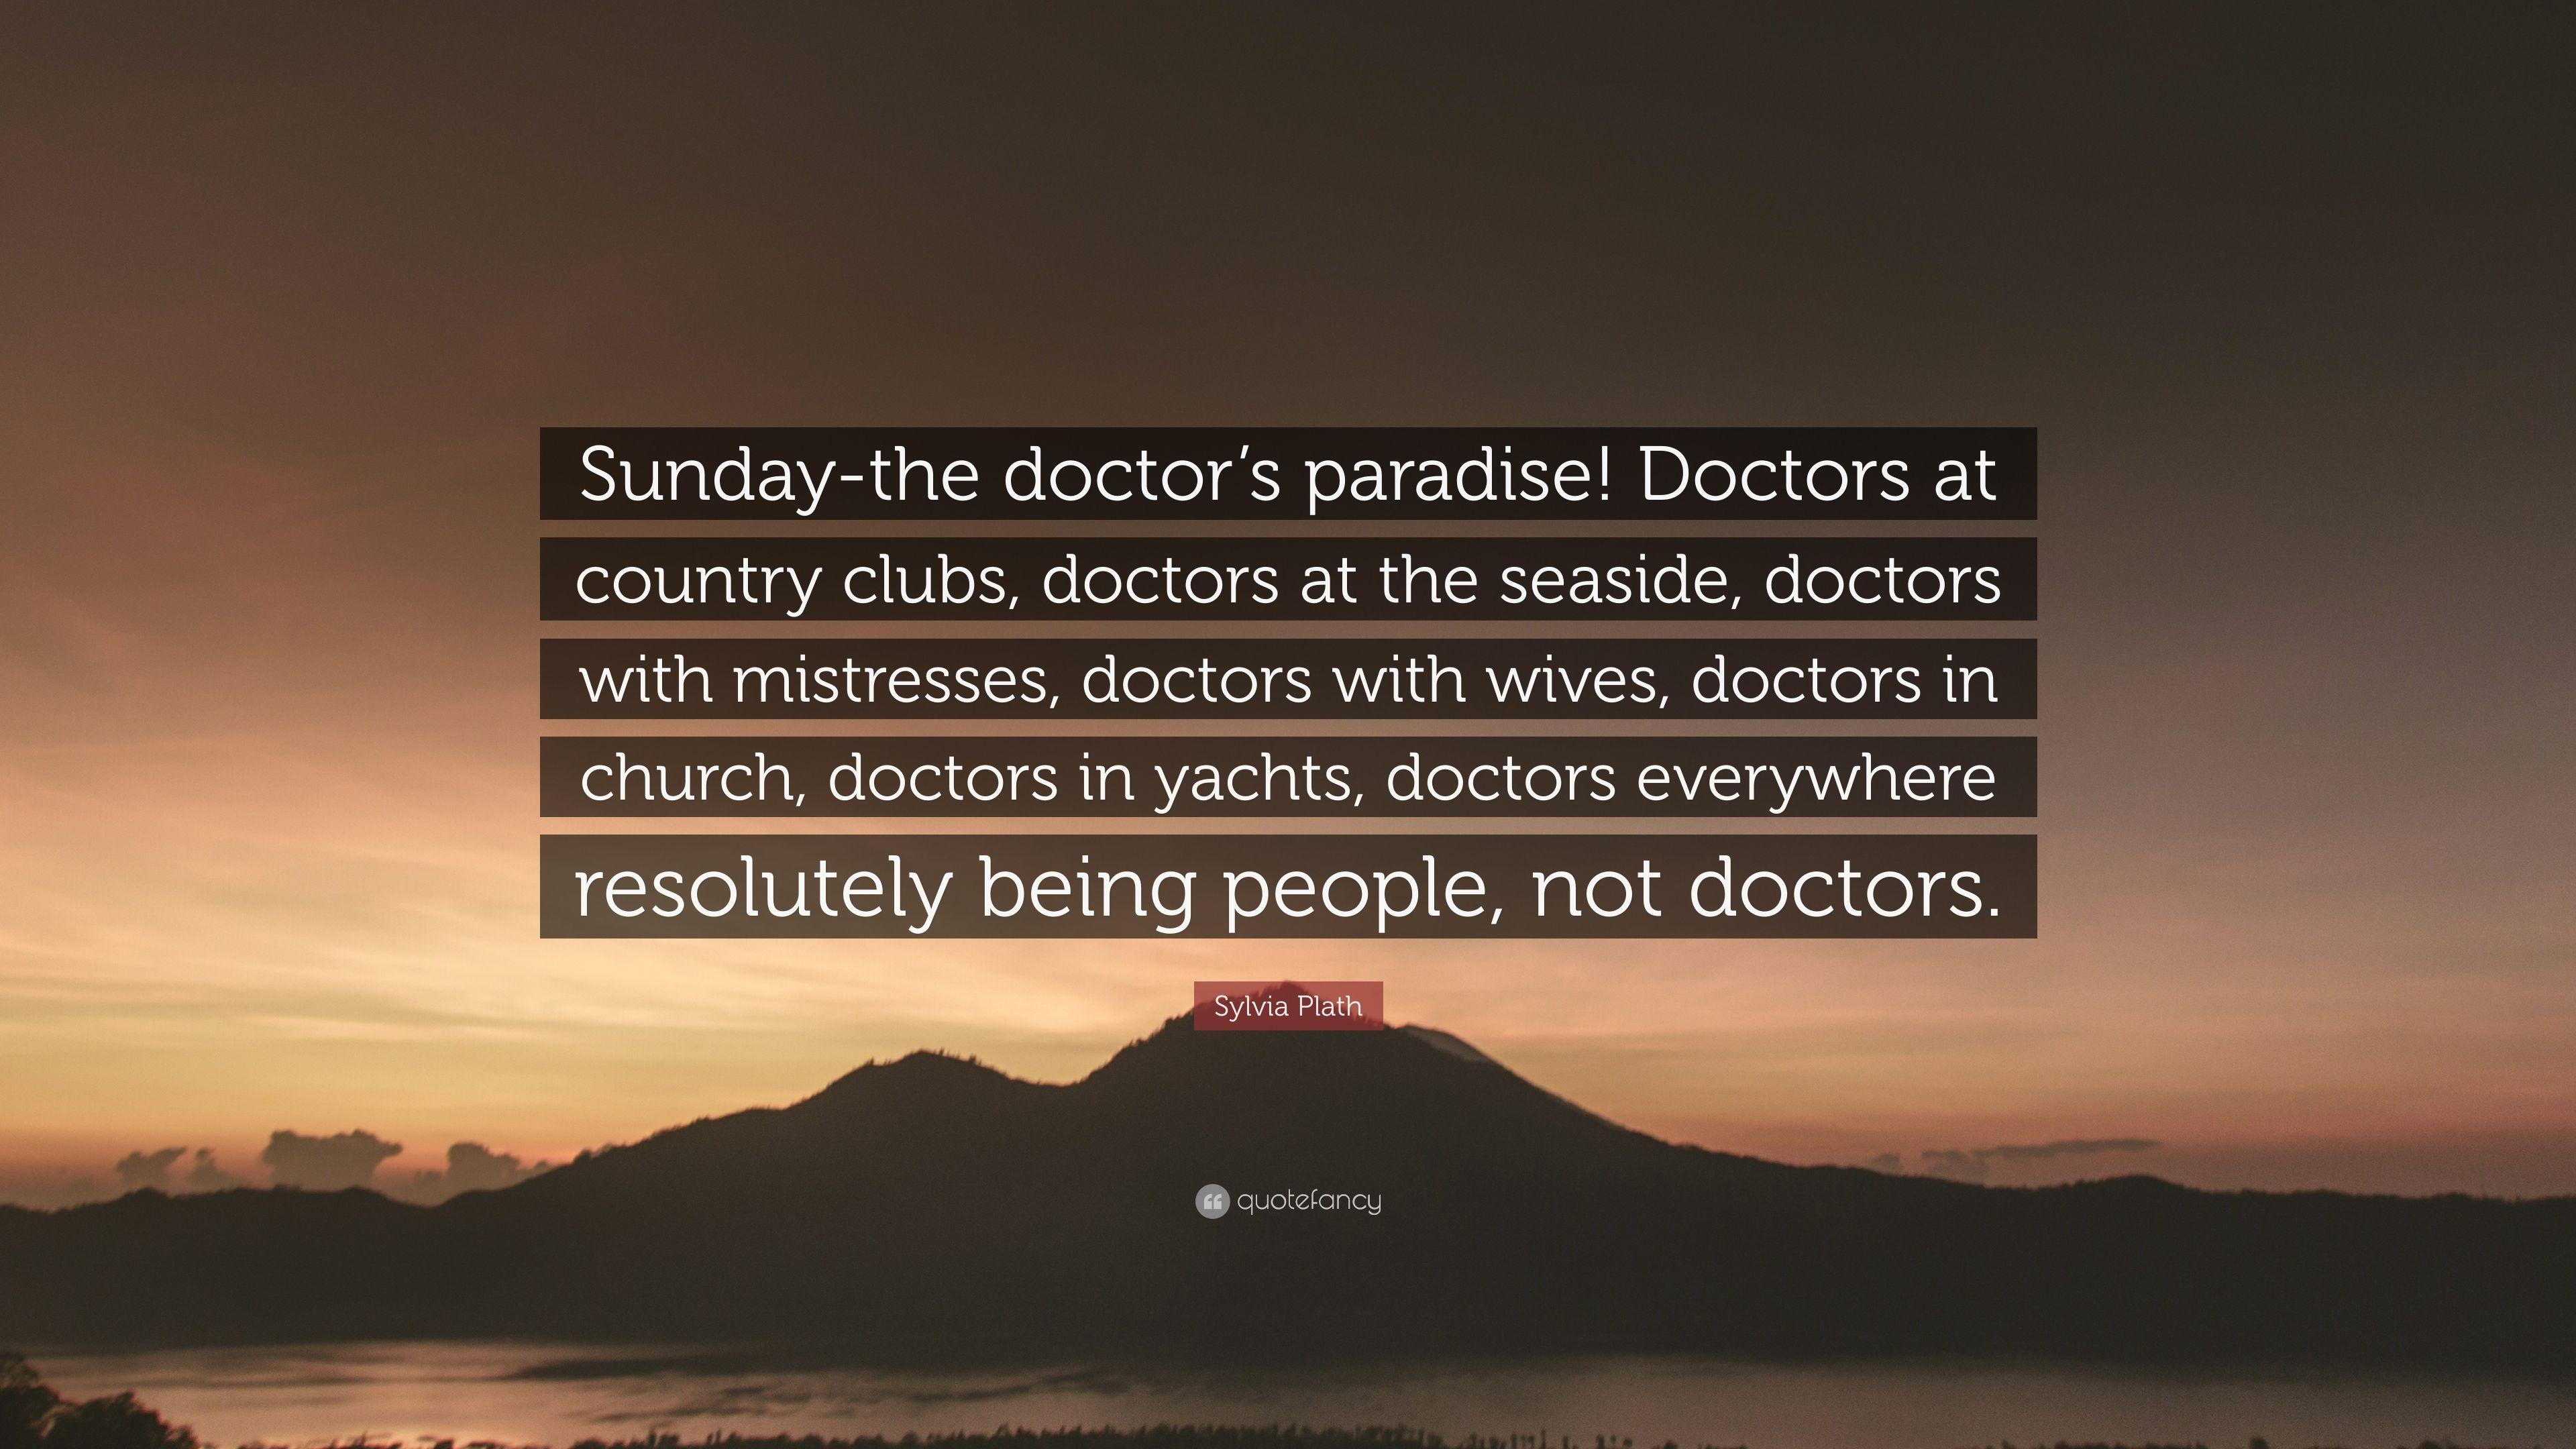 Sylvia Plath Quote: “Sunday The Doctor's Paradise! Doctors